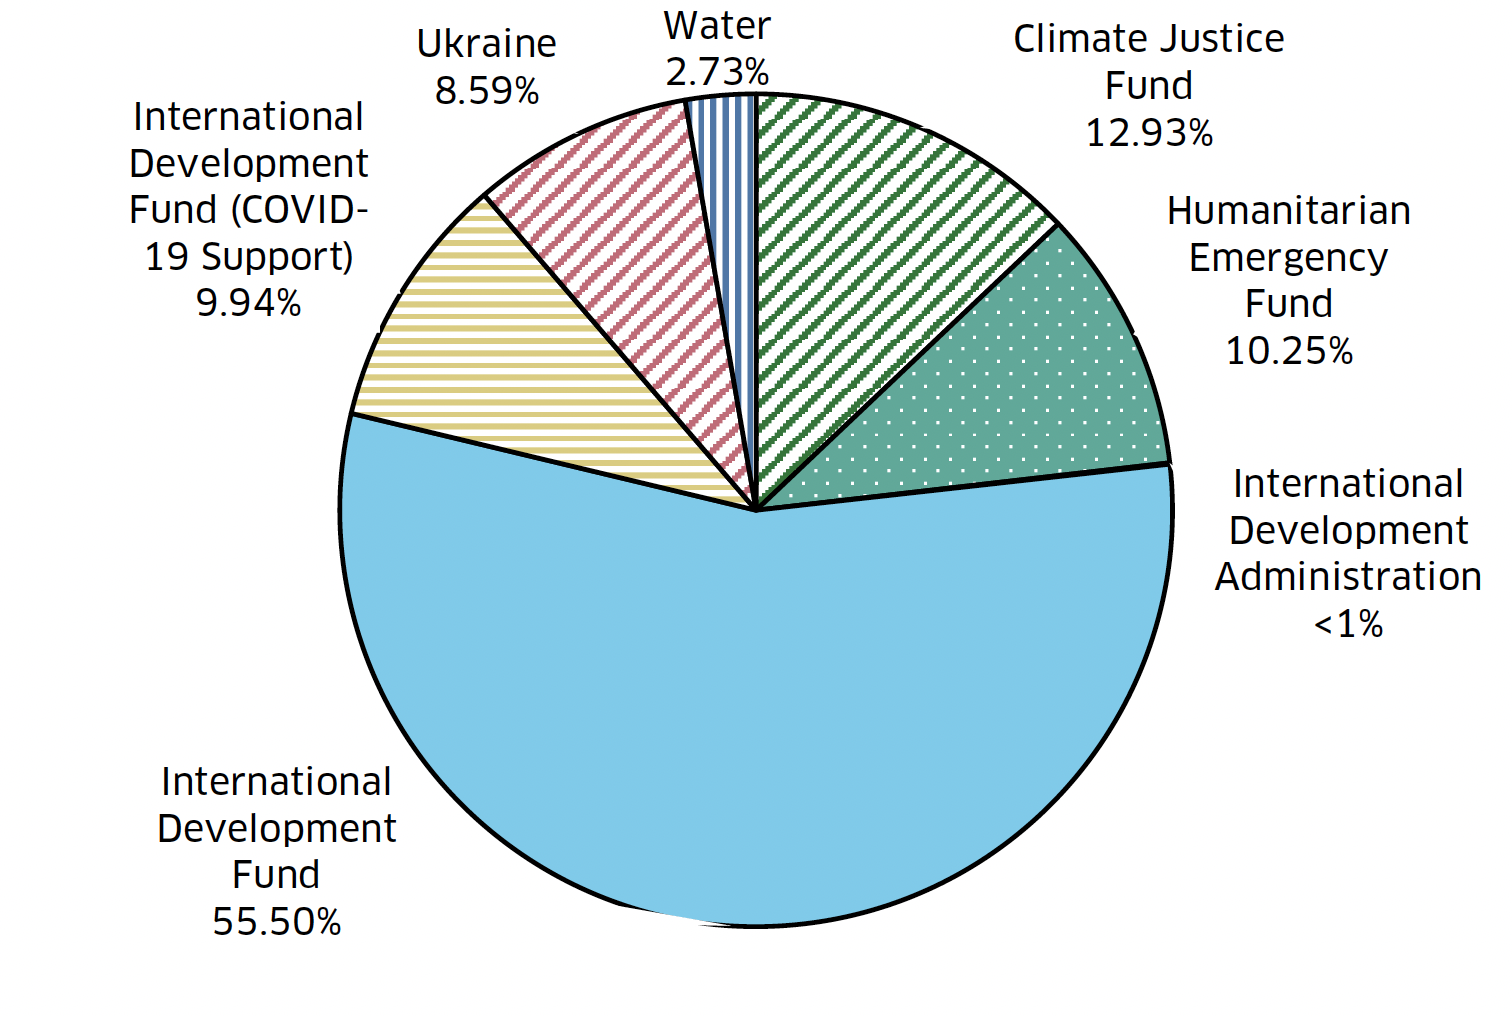 A graph showing share of total ODA spend 2021-23 by funding stream (excludes in kind donations and returned funding) with IDF COVID-19 Support at 9.94%, Ukraine at 8.59%, Water at 2.73%, CJF at 12.93%, HEF at 10.25%, IDA at <1% and IDF at 55.5%.